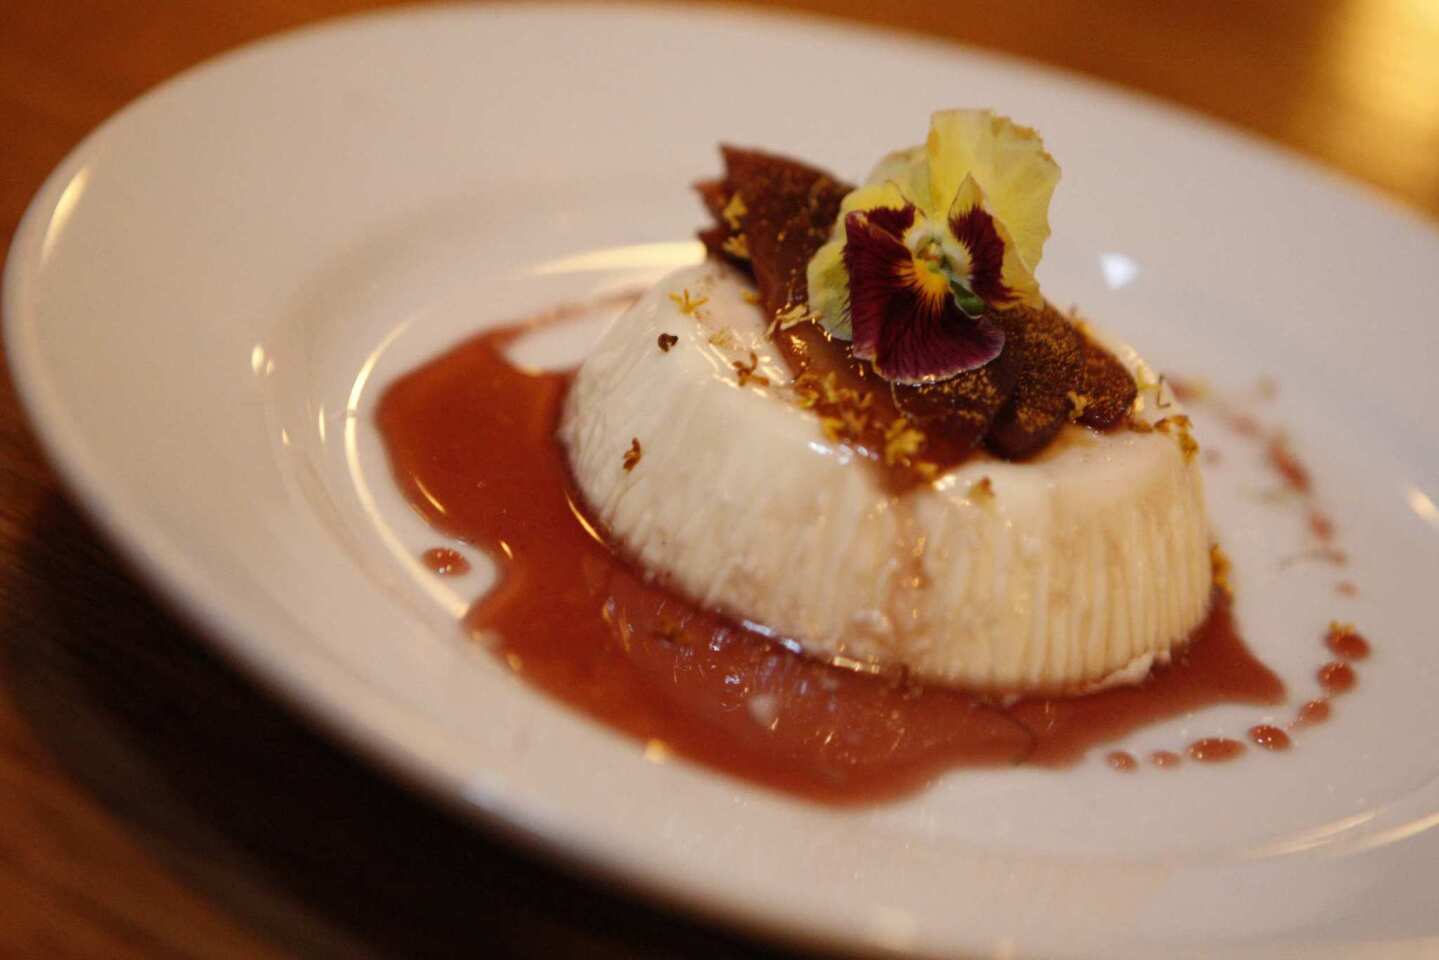 Osmanthus panna cotta with red wine-poached pears.